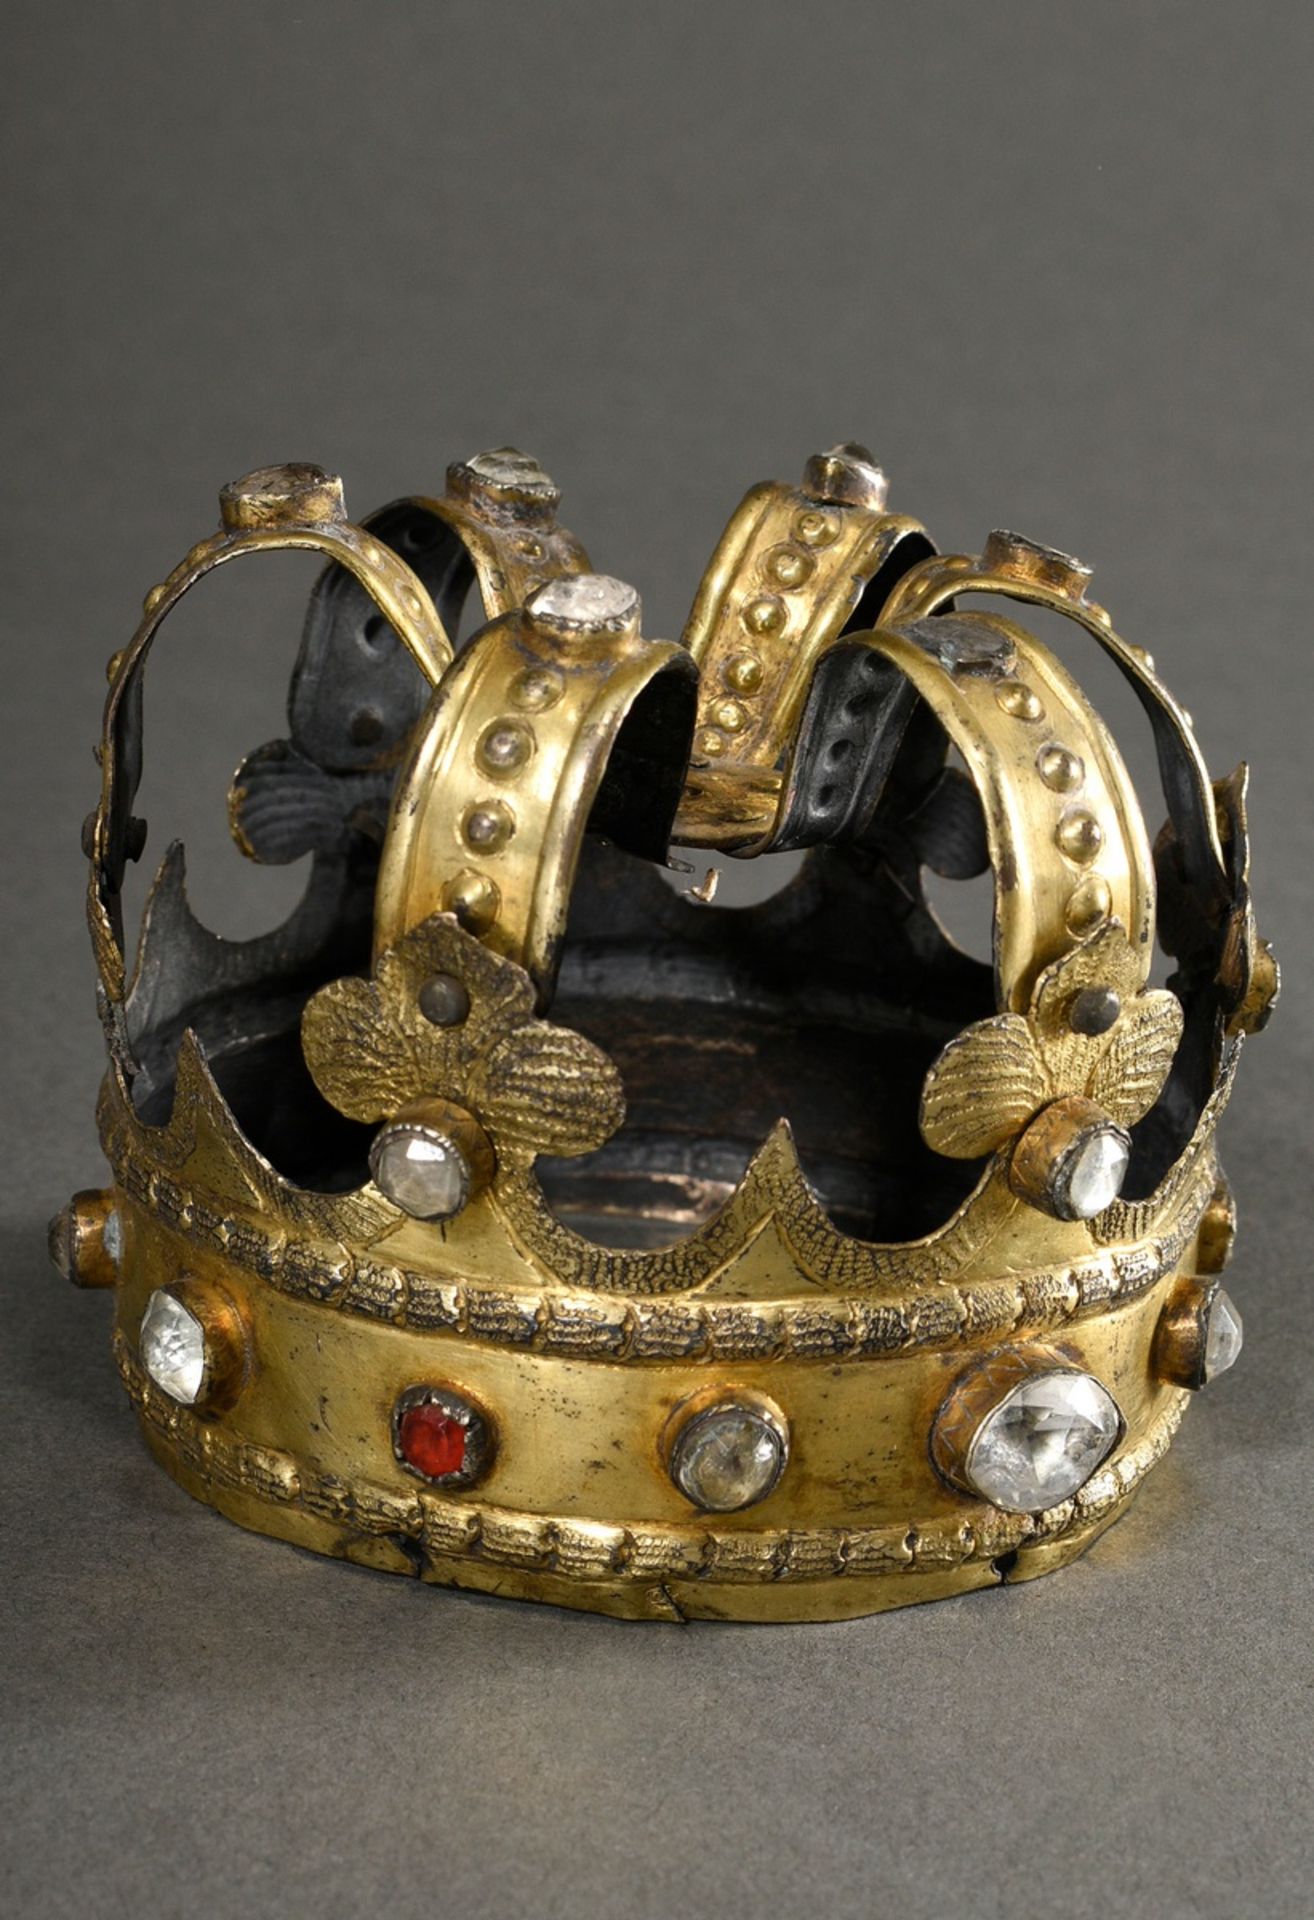 Antique crown of the Virgin Mary with glass stones, probably South German, 19th century, gilt metal